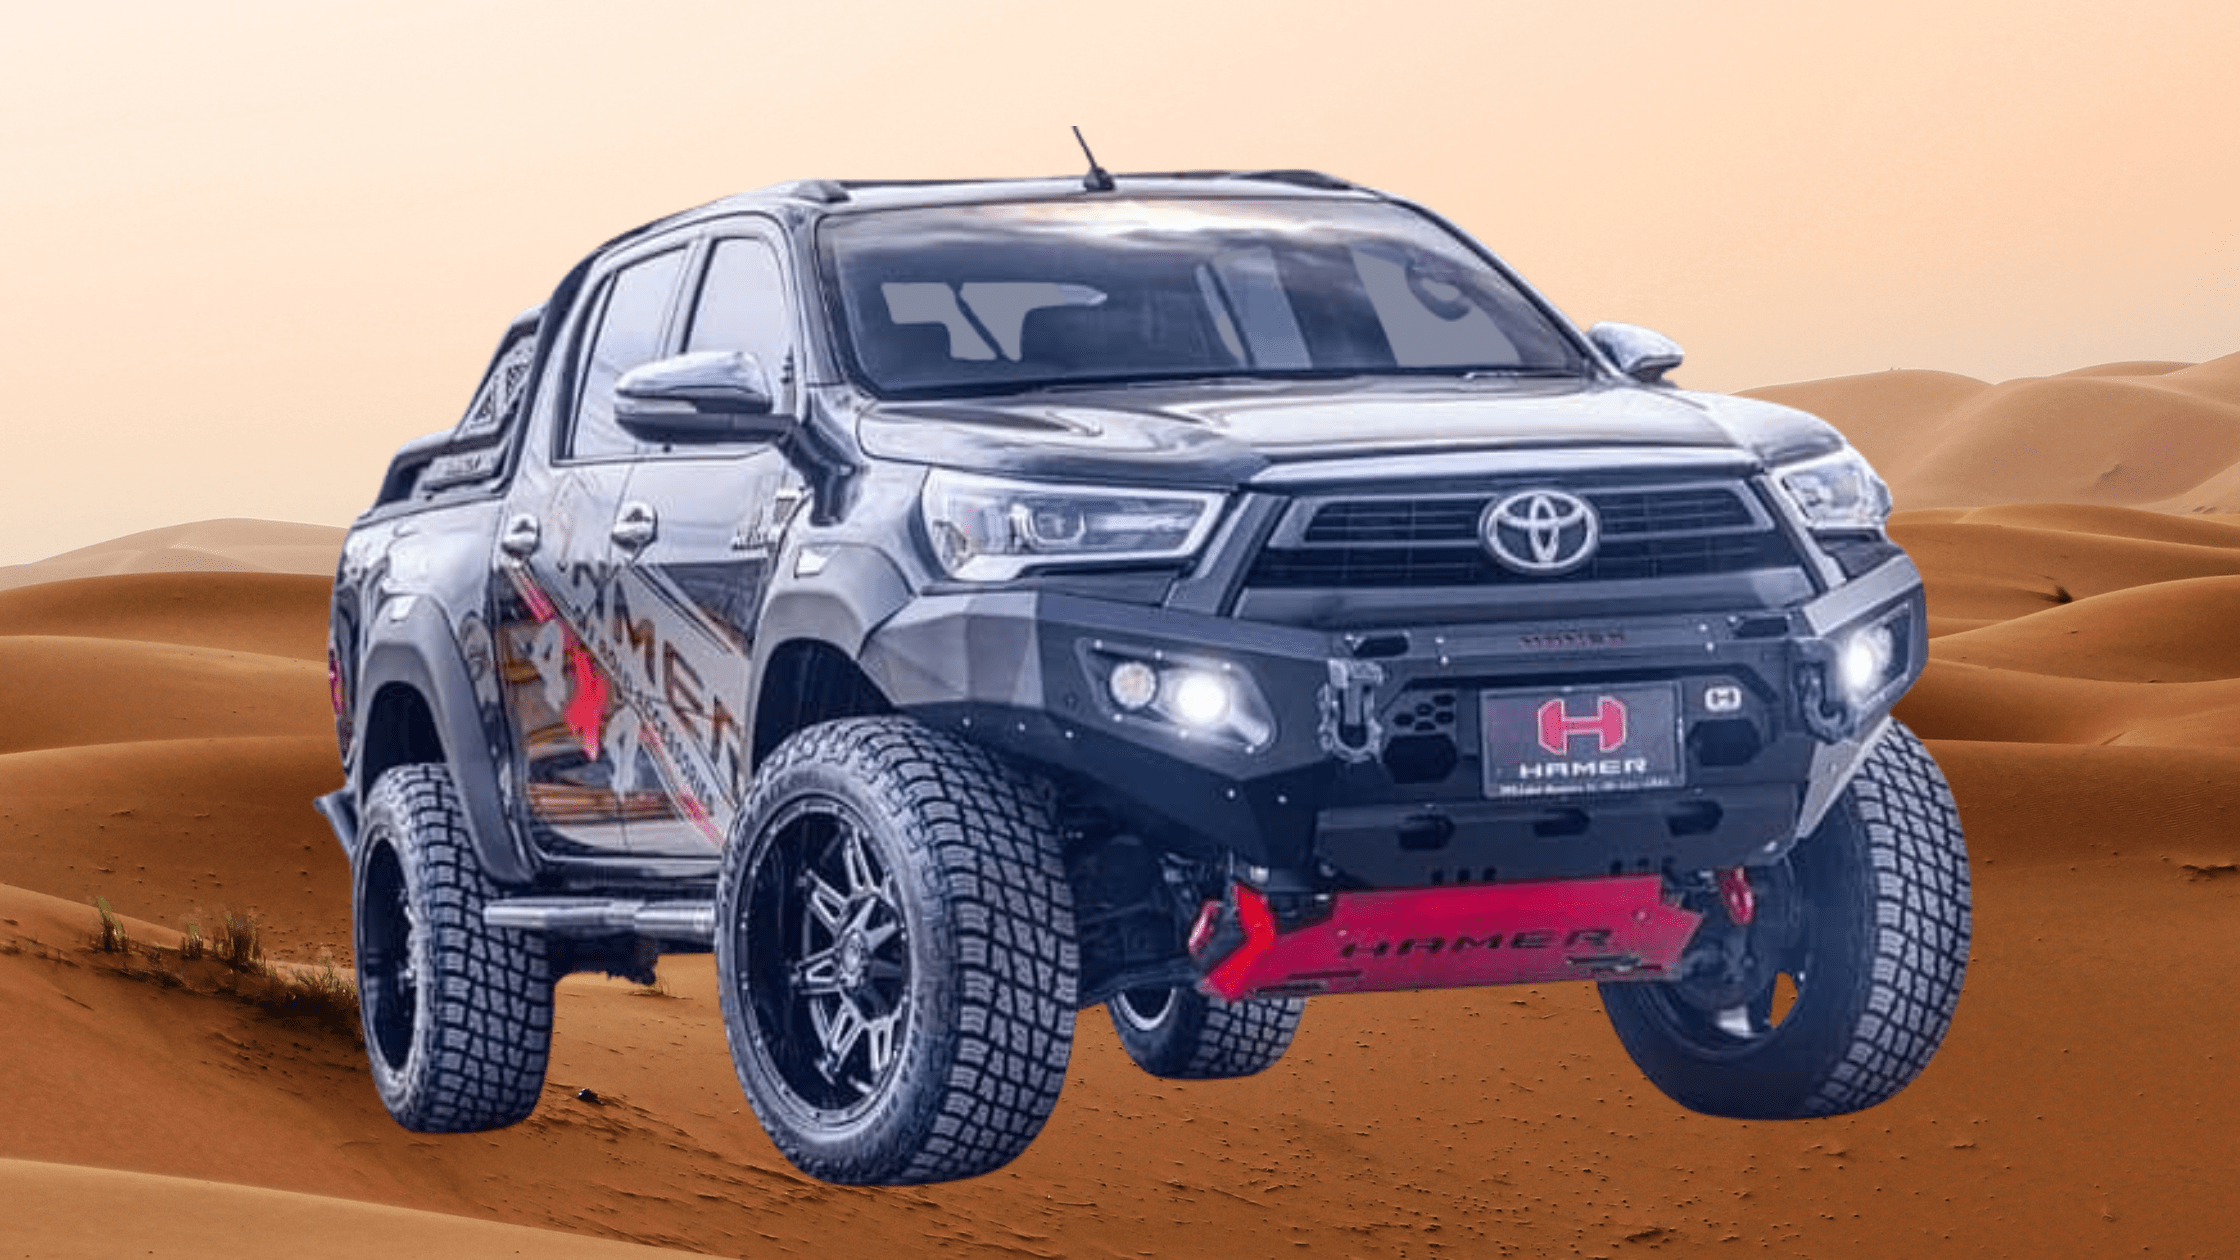 Toyota Hilux Armored Bumpers in Pakistan - Blog